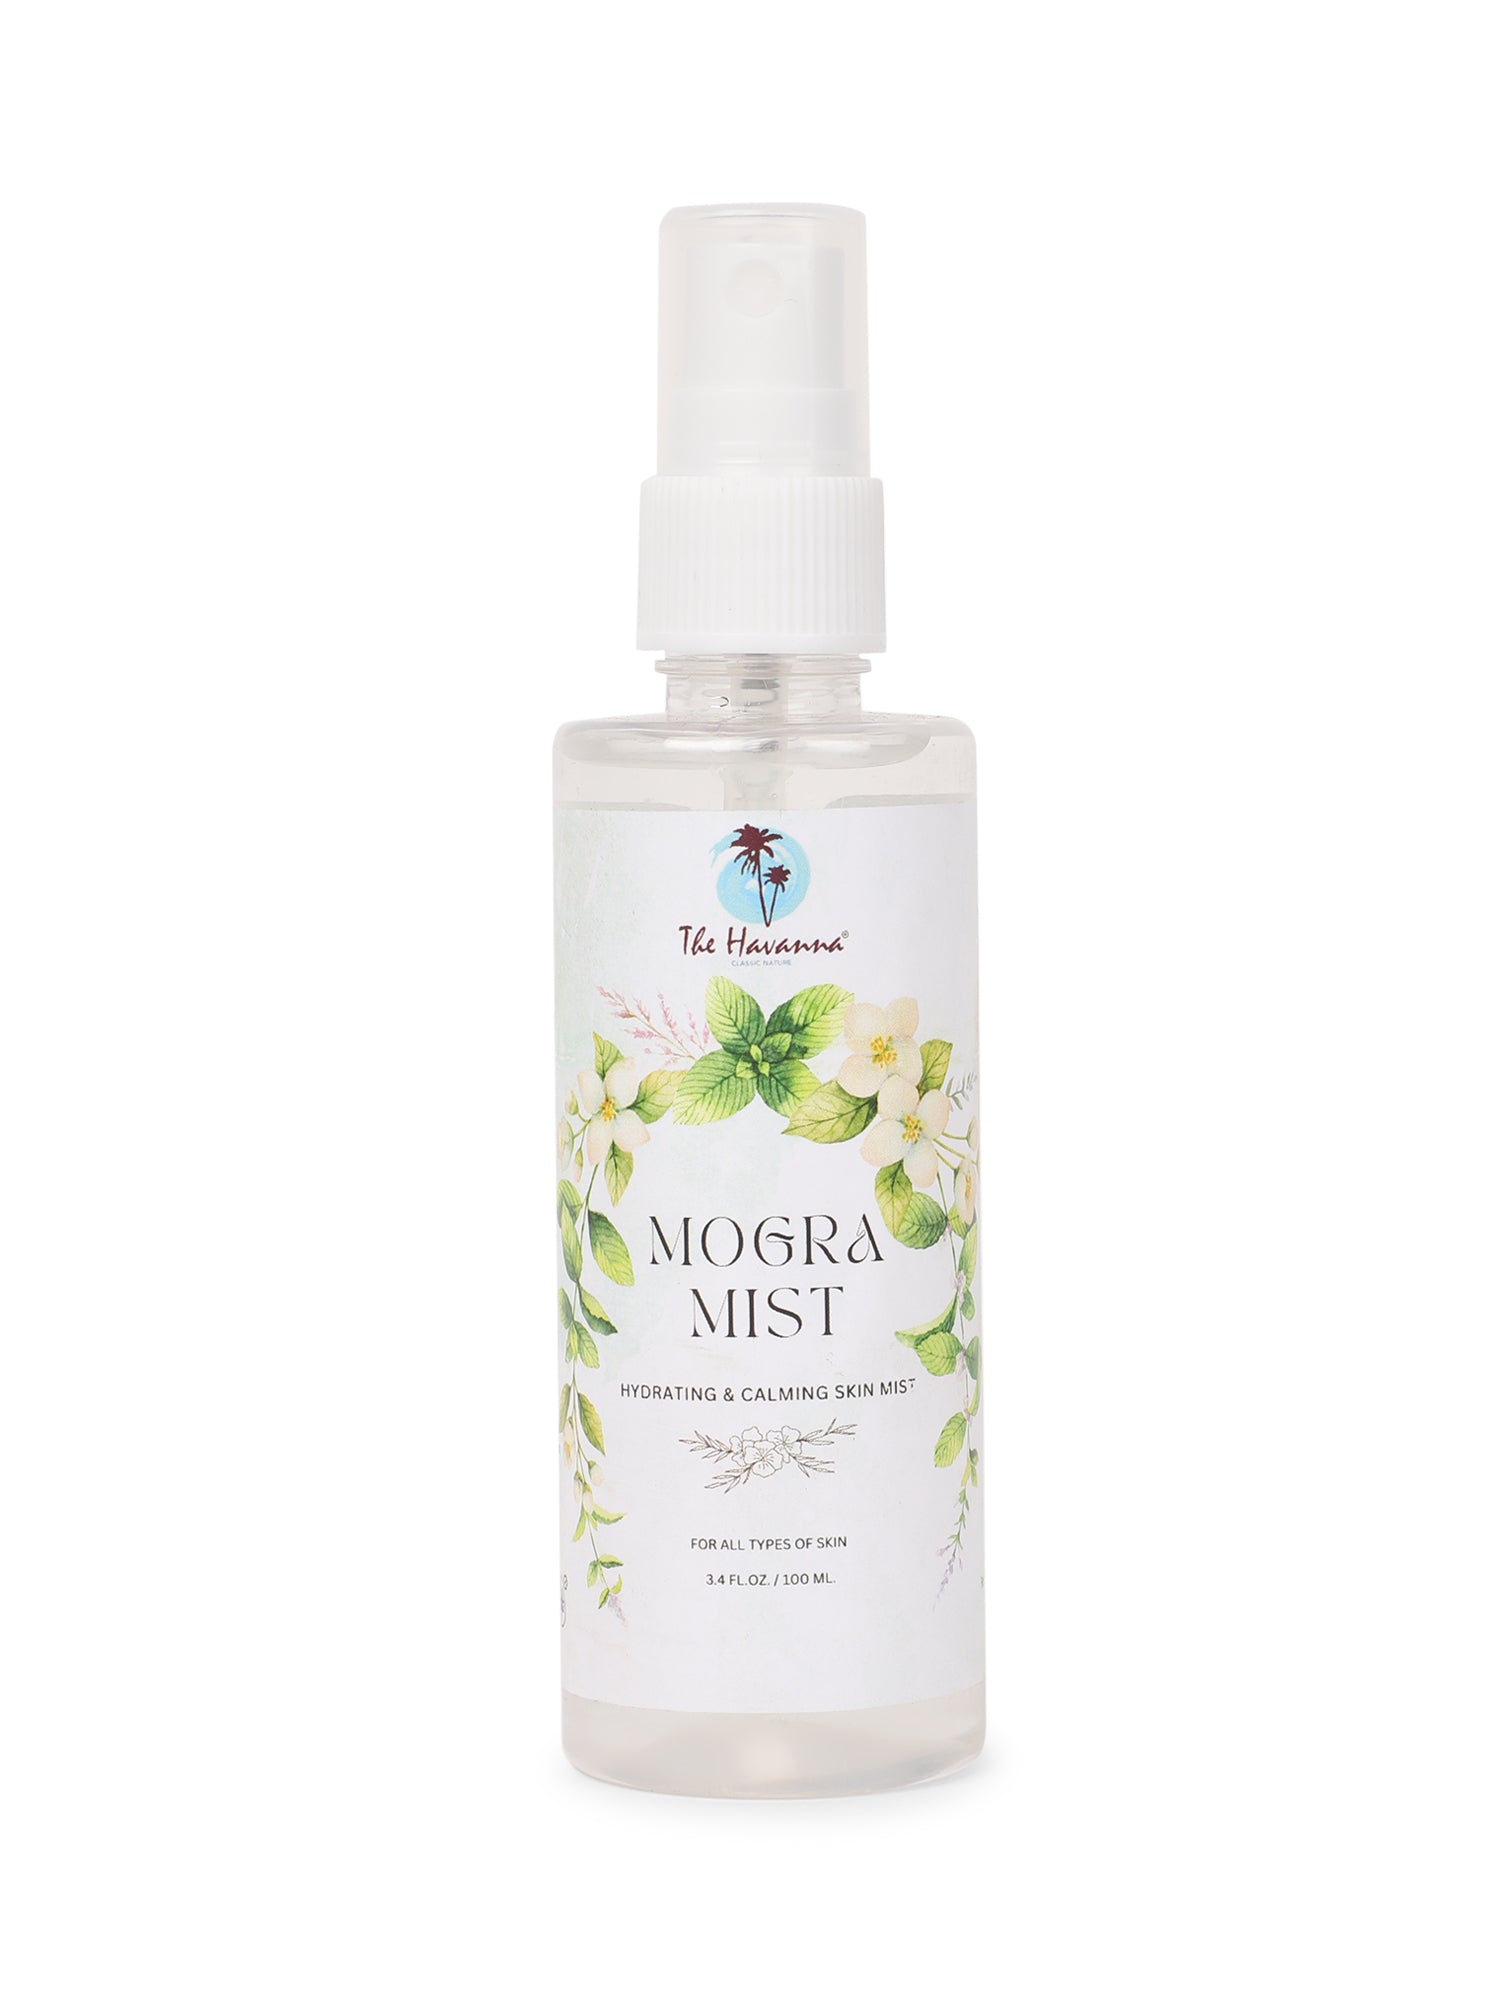 Mogra skin Mist usful for Hydrates detoxifies, controls acne, reduces skin aging and promotes taut skin-The Havanna Classic Nature